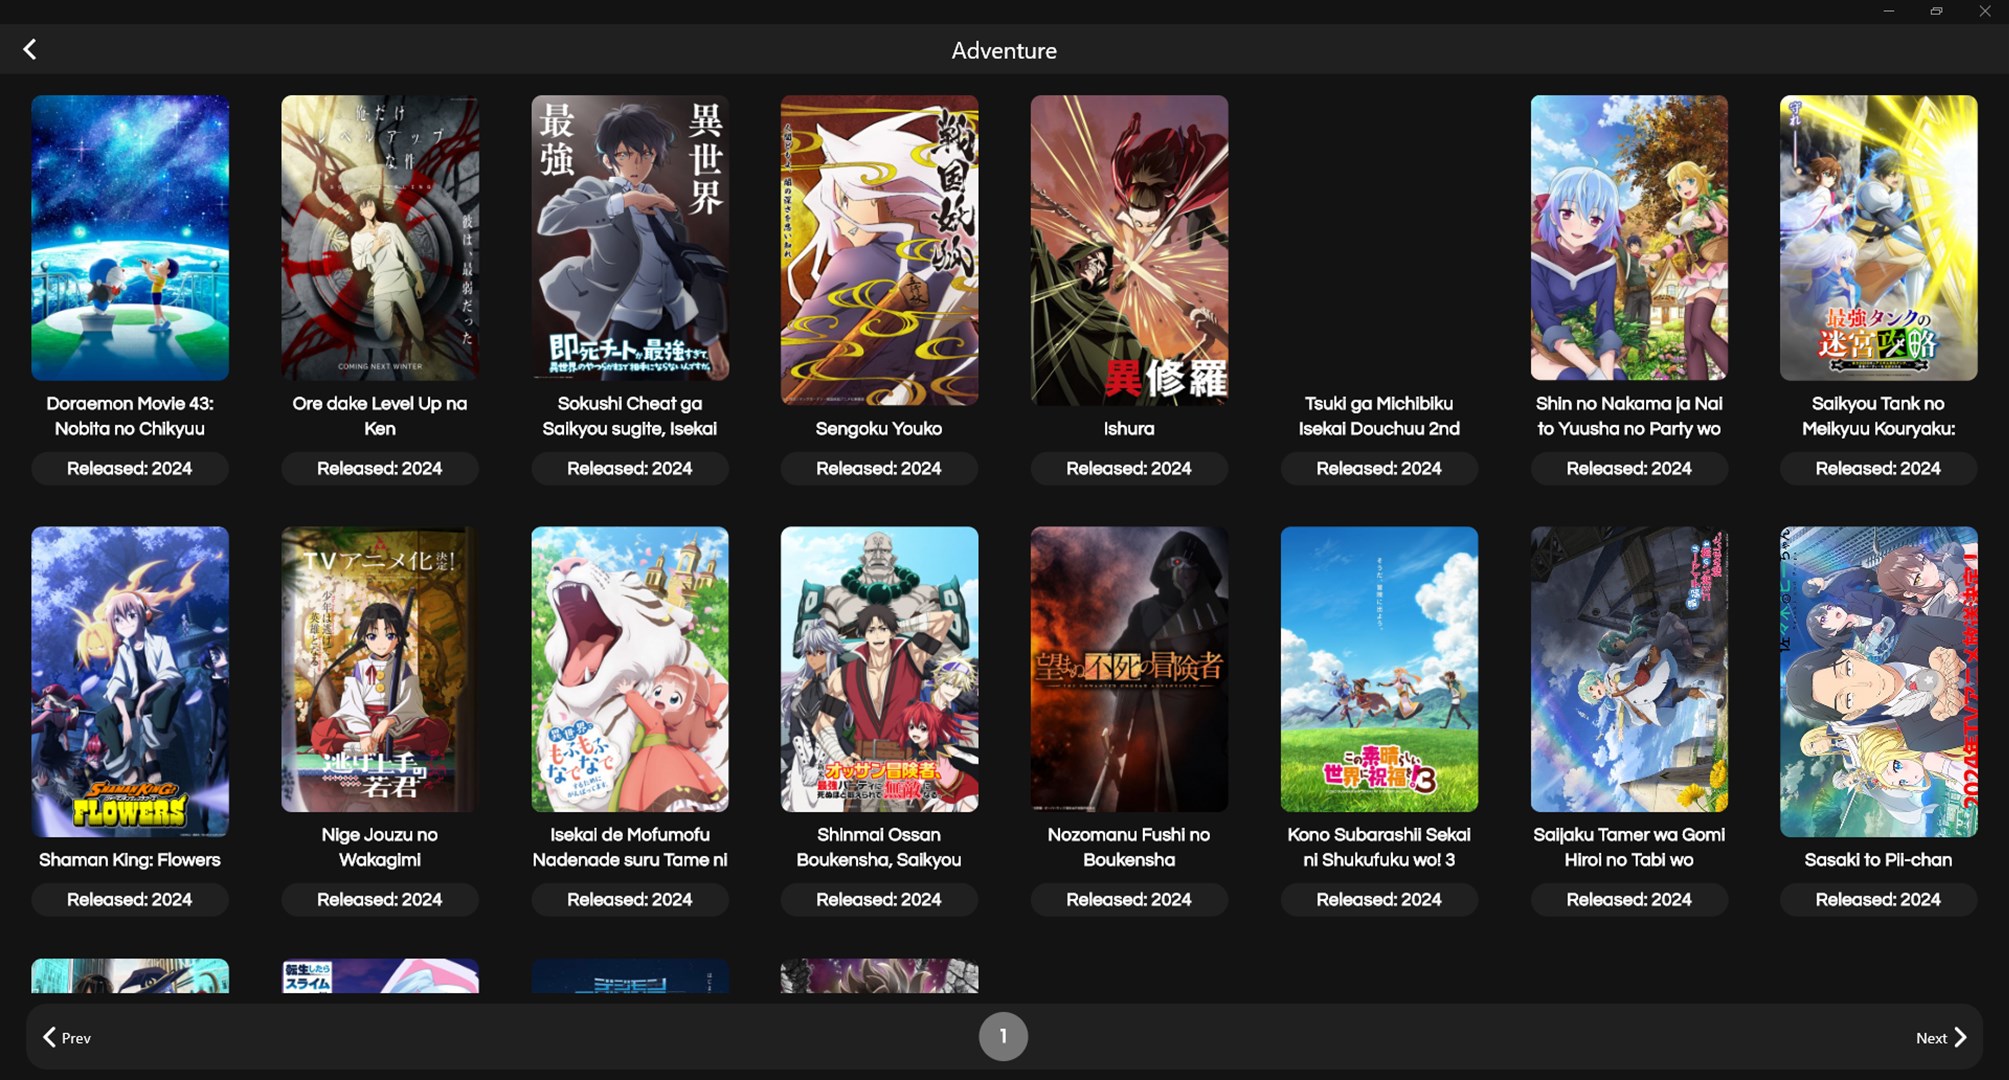 Recommendations on what anime movies I should watch next based on